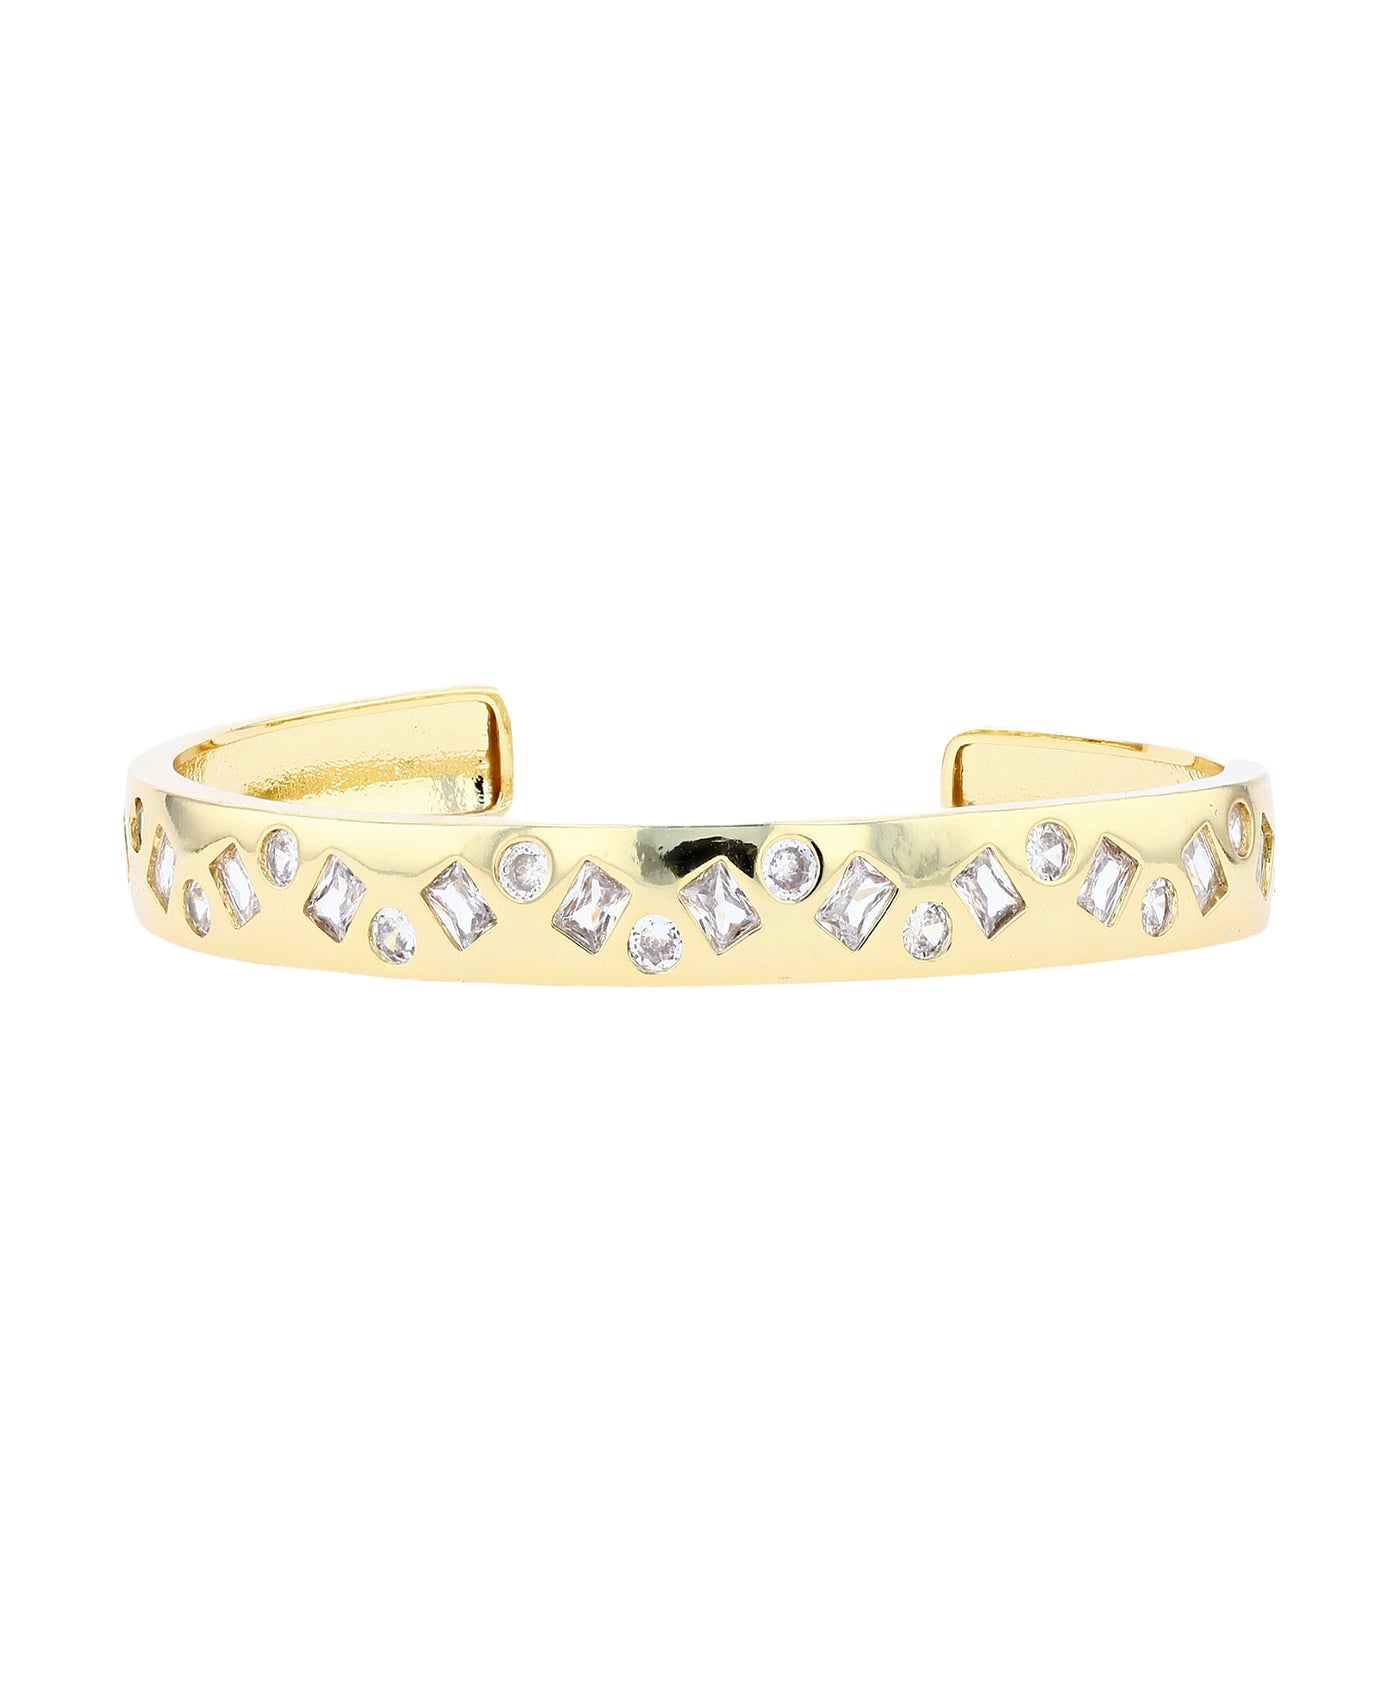 Scattered Cubic Zirconia Cuff Bracelet image 1